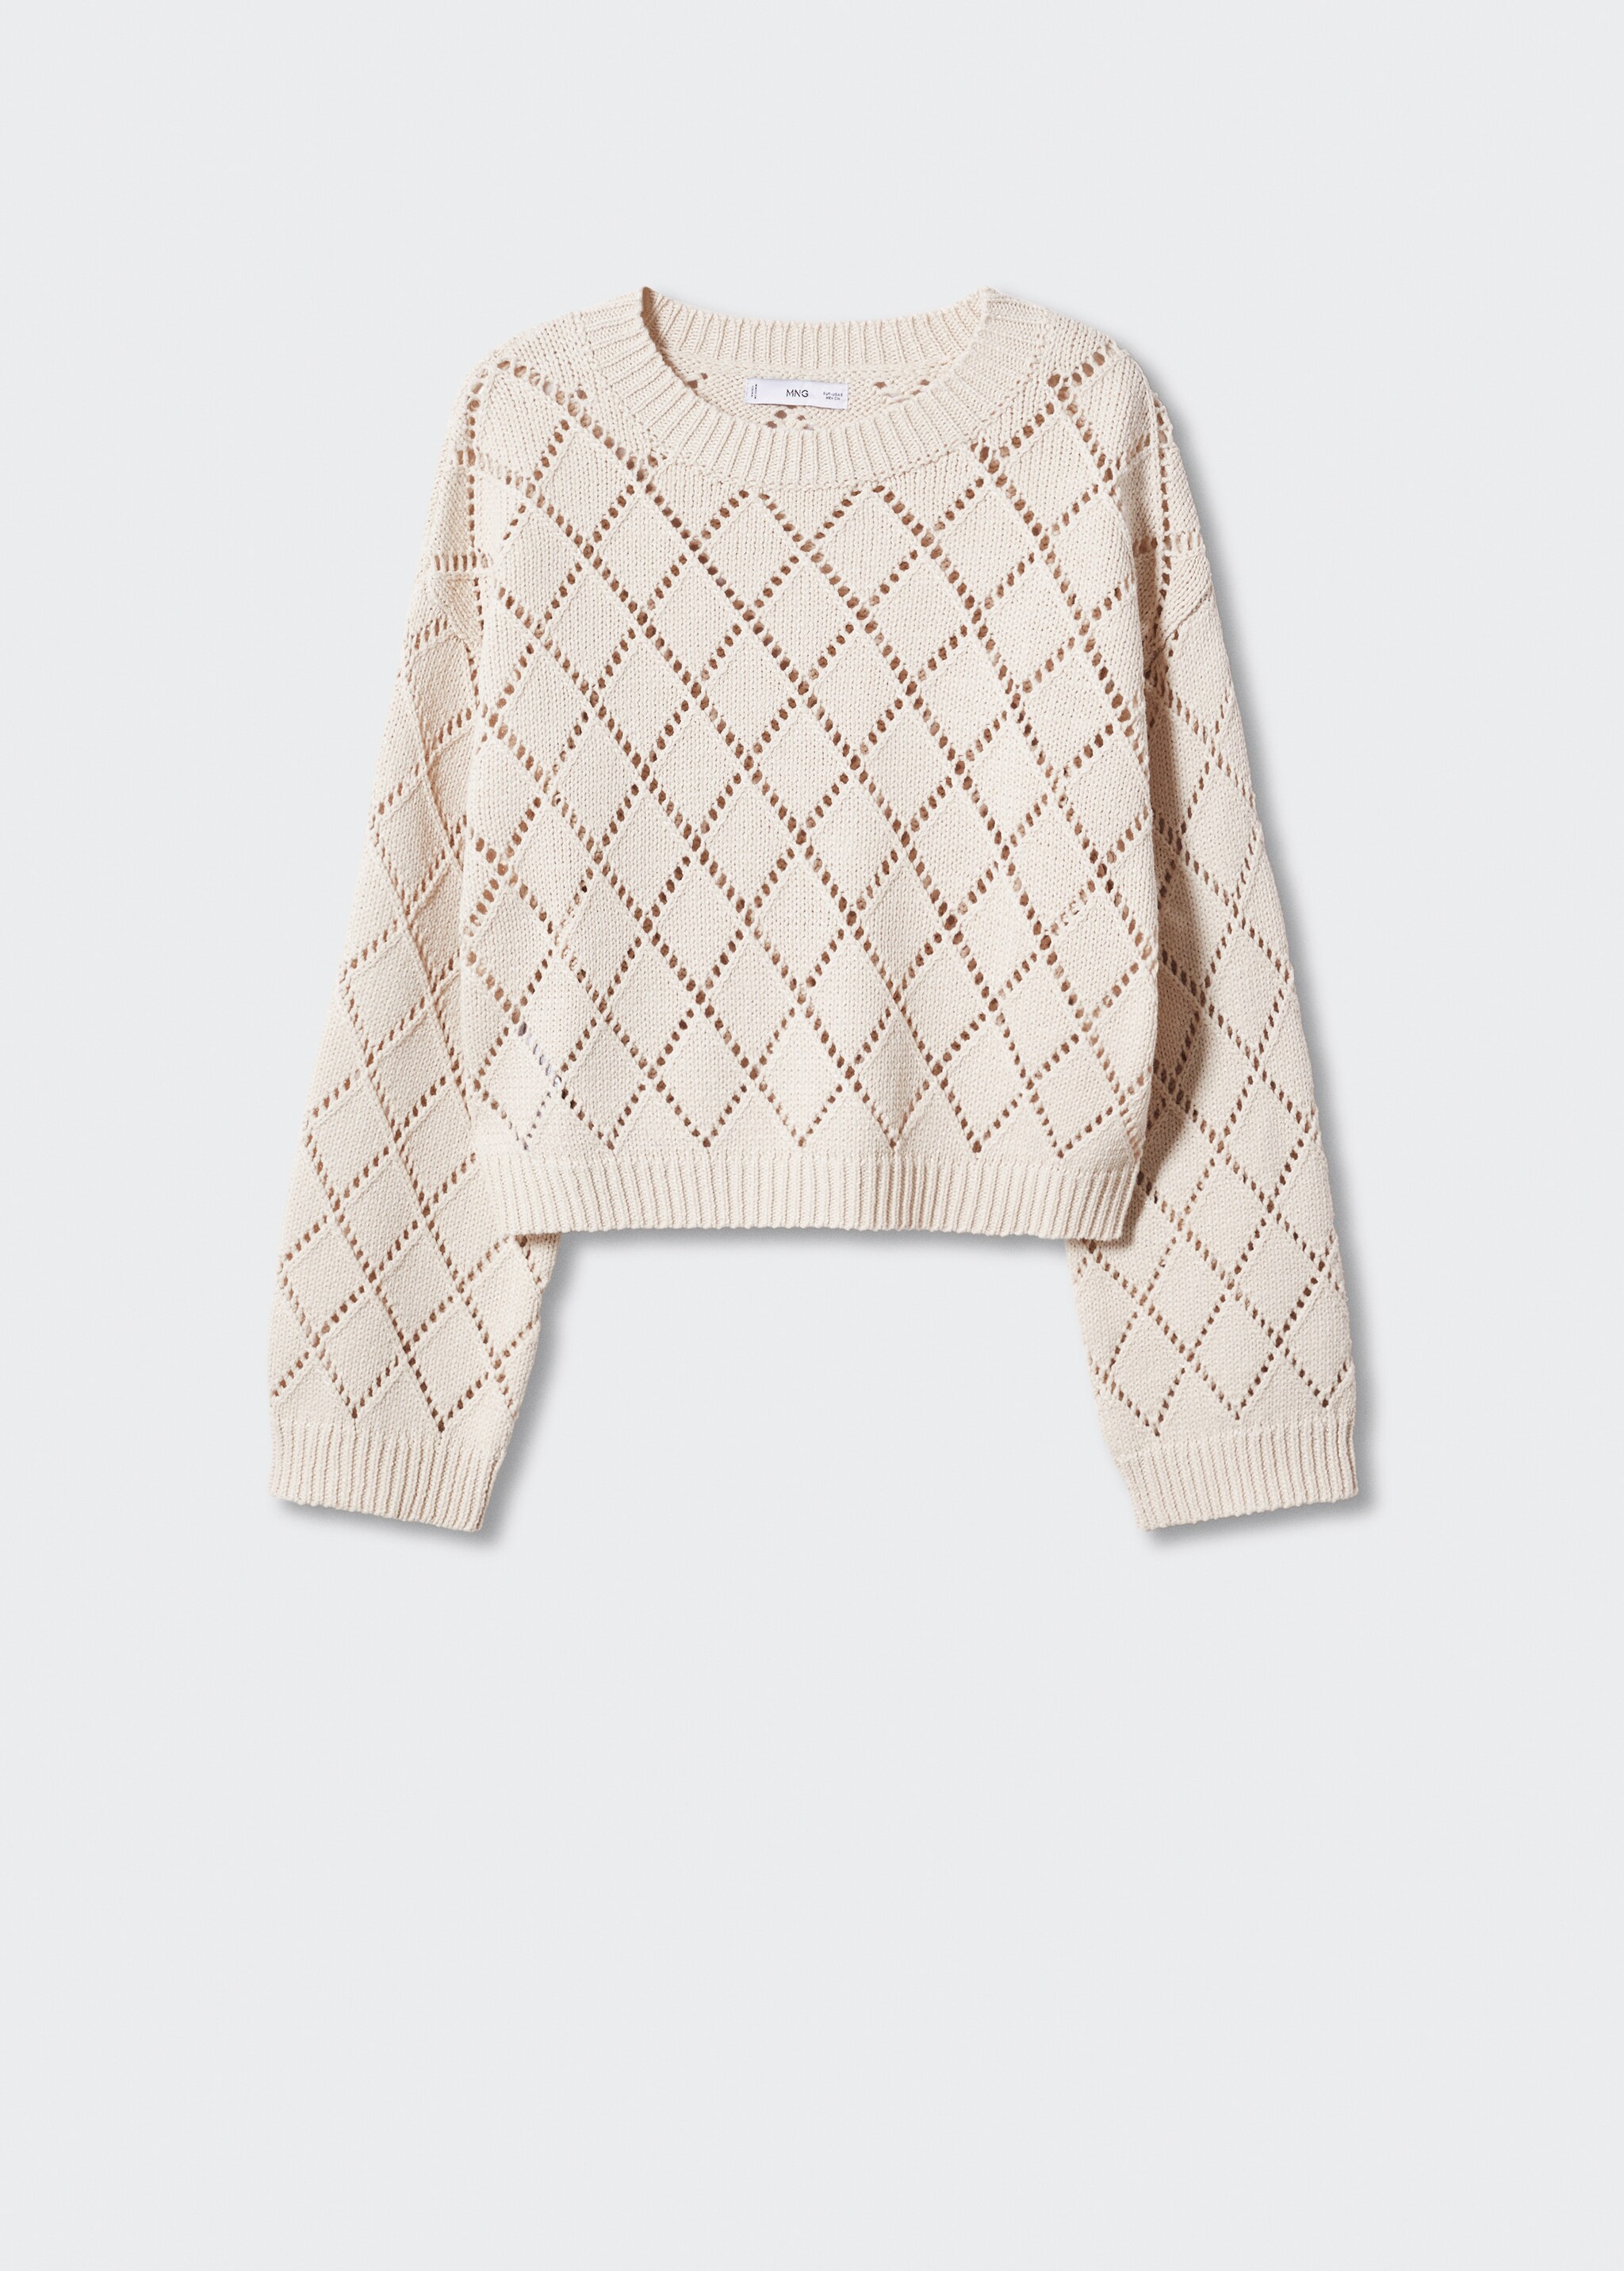 Cotton cropped openwork sweater - Article without model